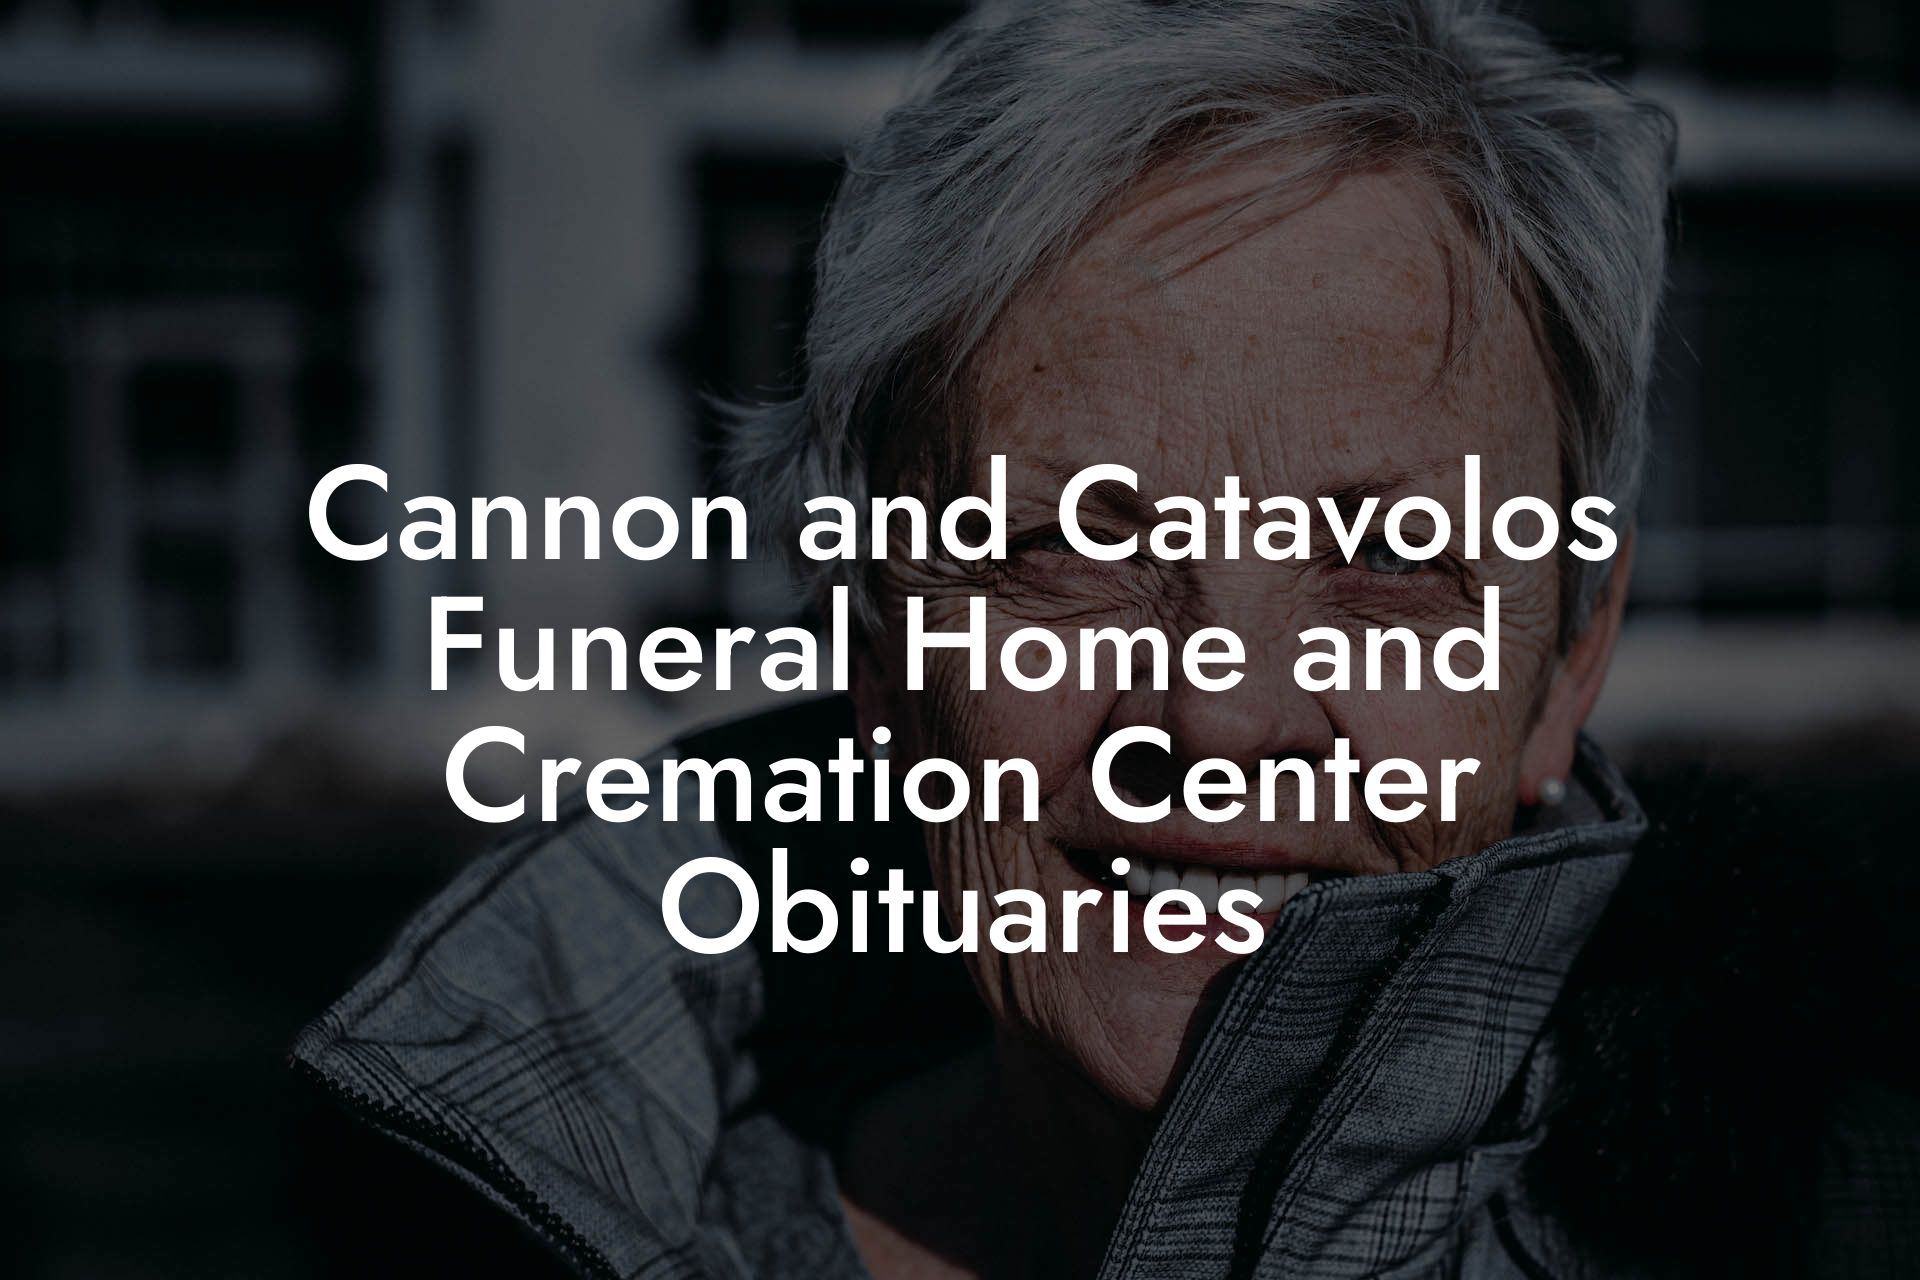 Cannon and Catavolos Funeral Home and Cremation Center Obituaries